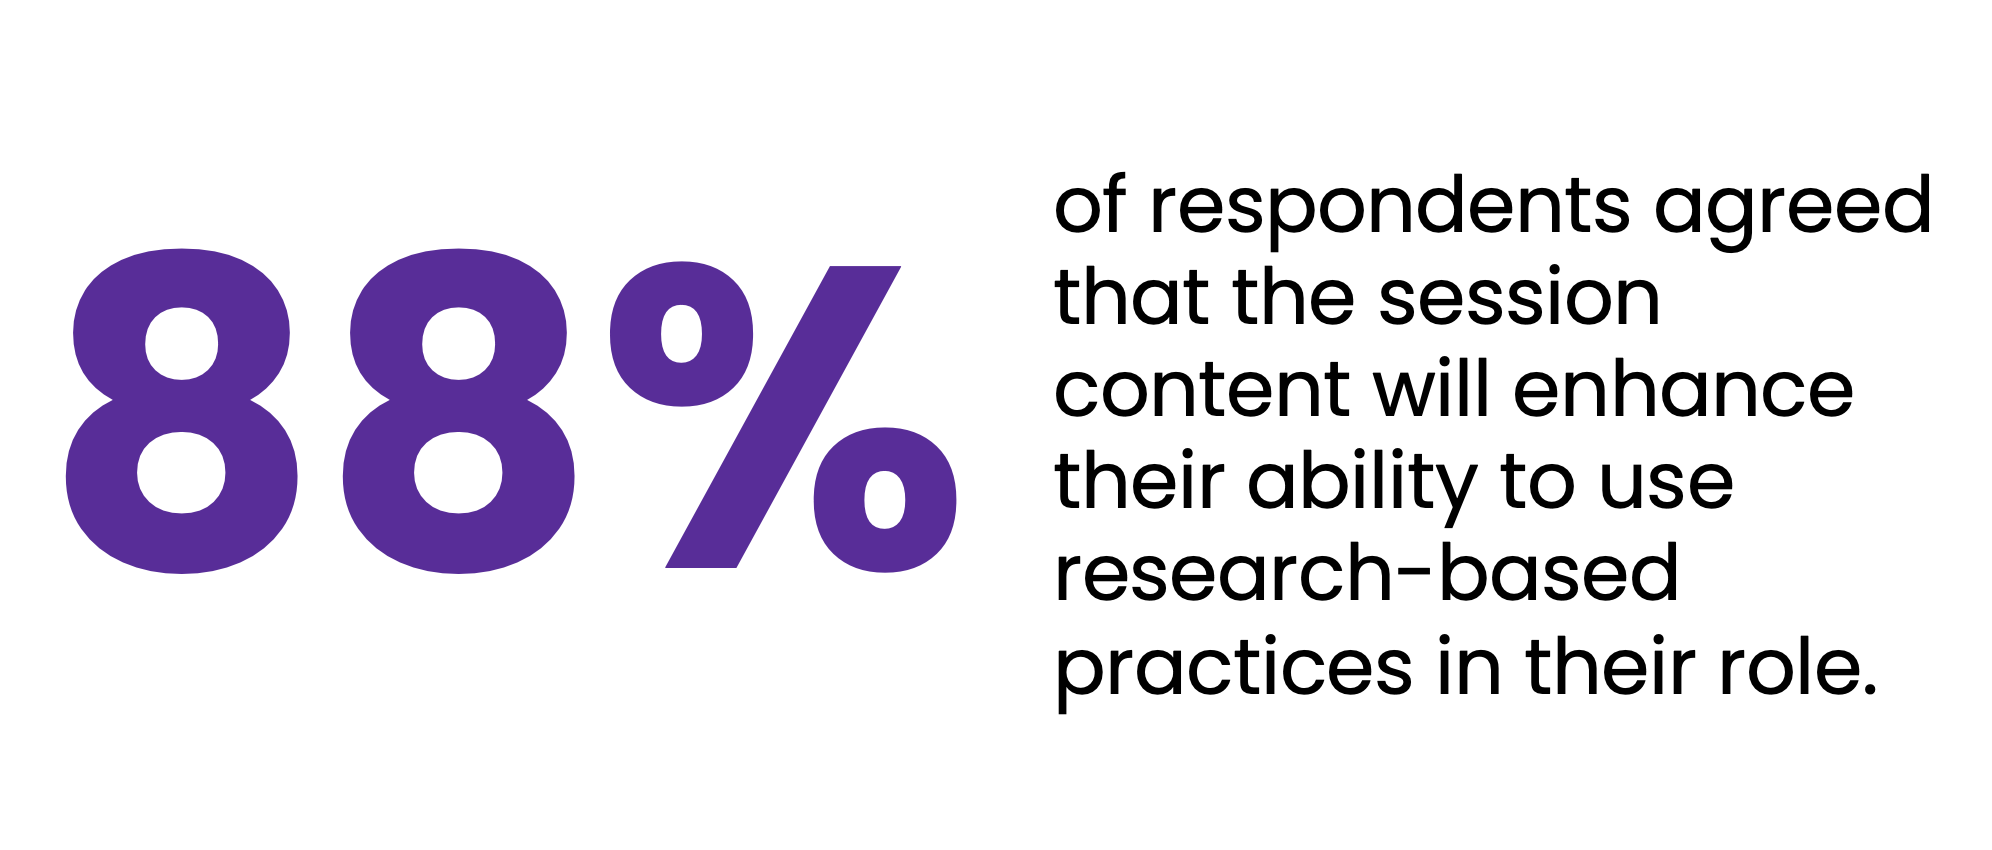 88% of respondents agreed that the session content will enhance their ability to use research-based practices in their role